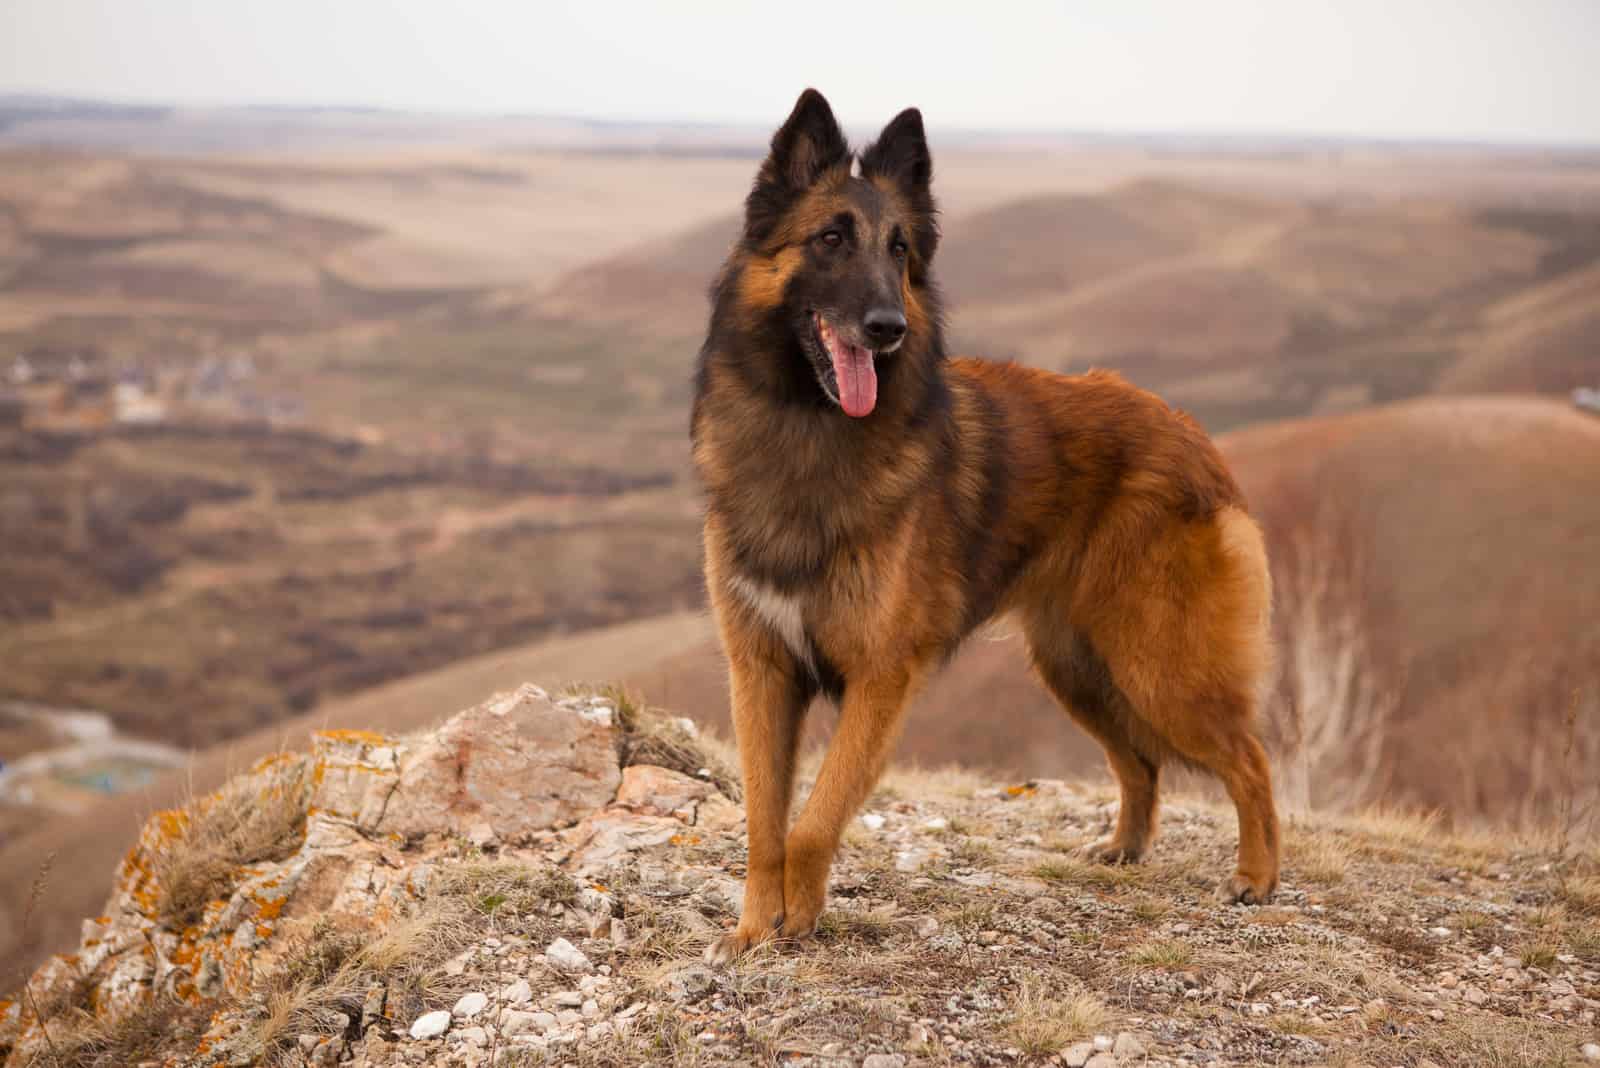 the beautiful Tervuren stands on a rock